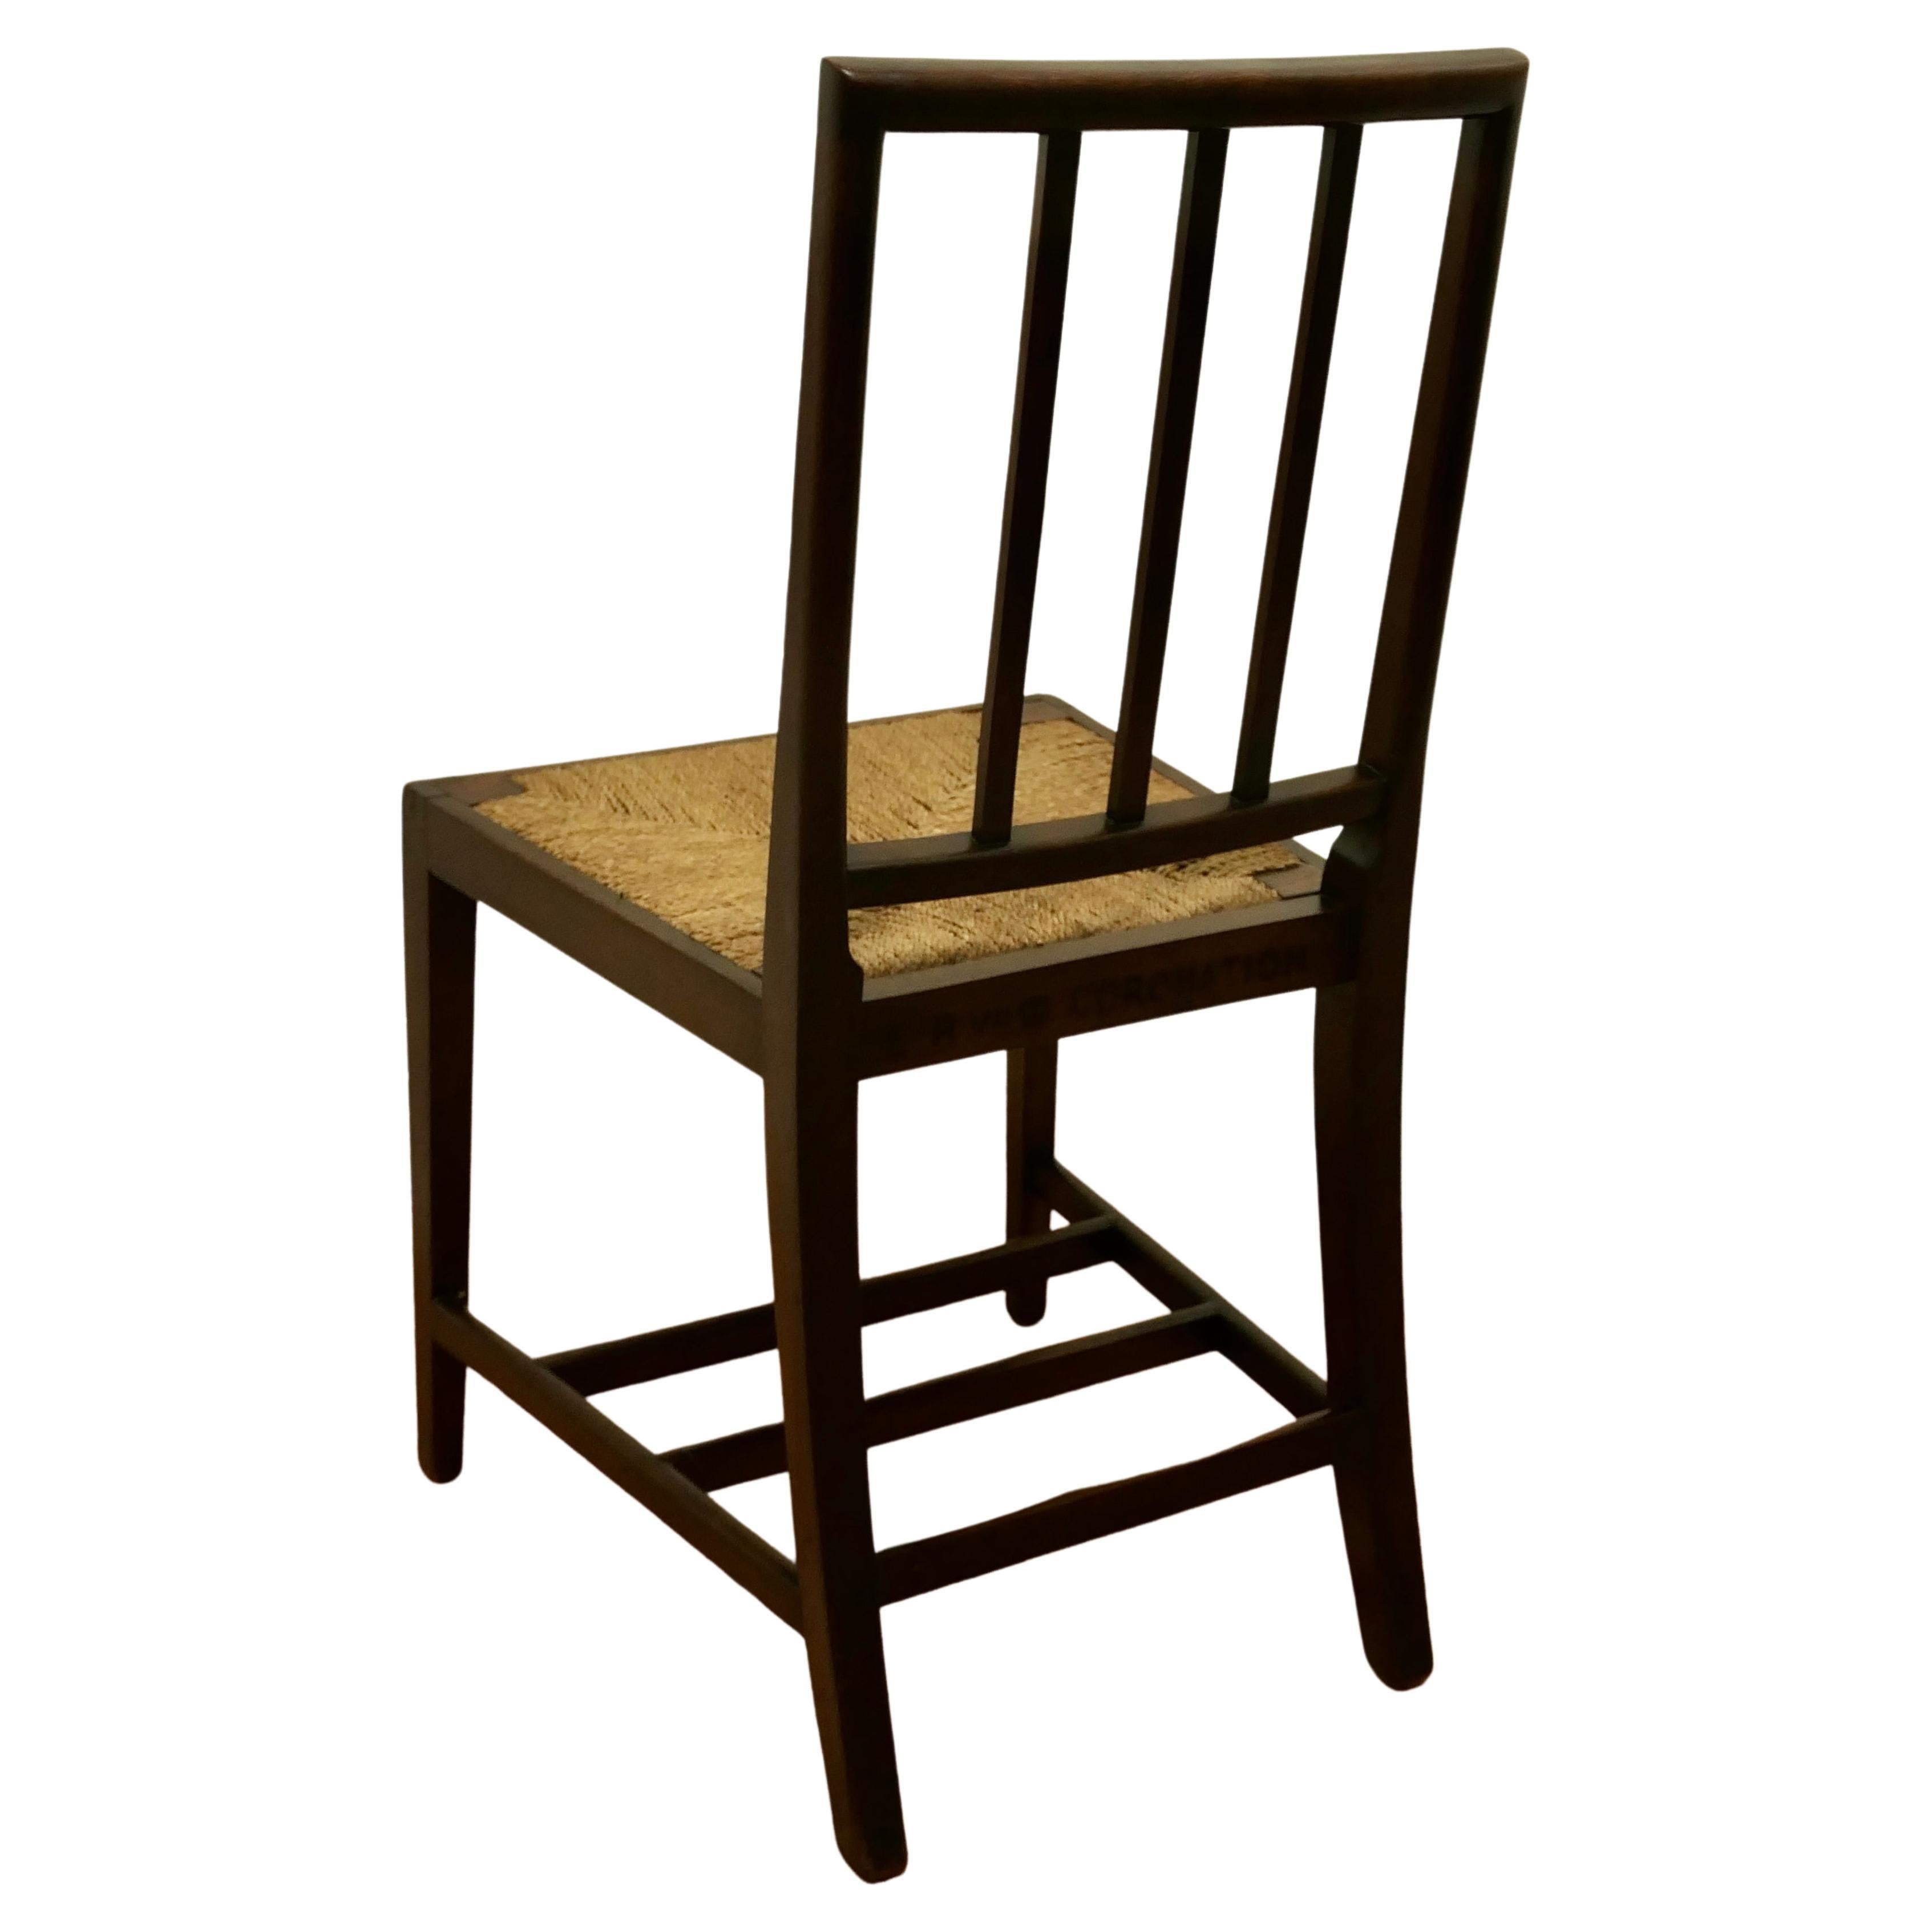 1901 E.R VII Coronation Chair in Cotswold Country Oak